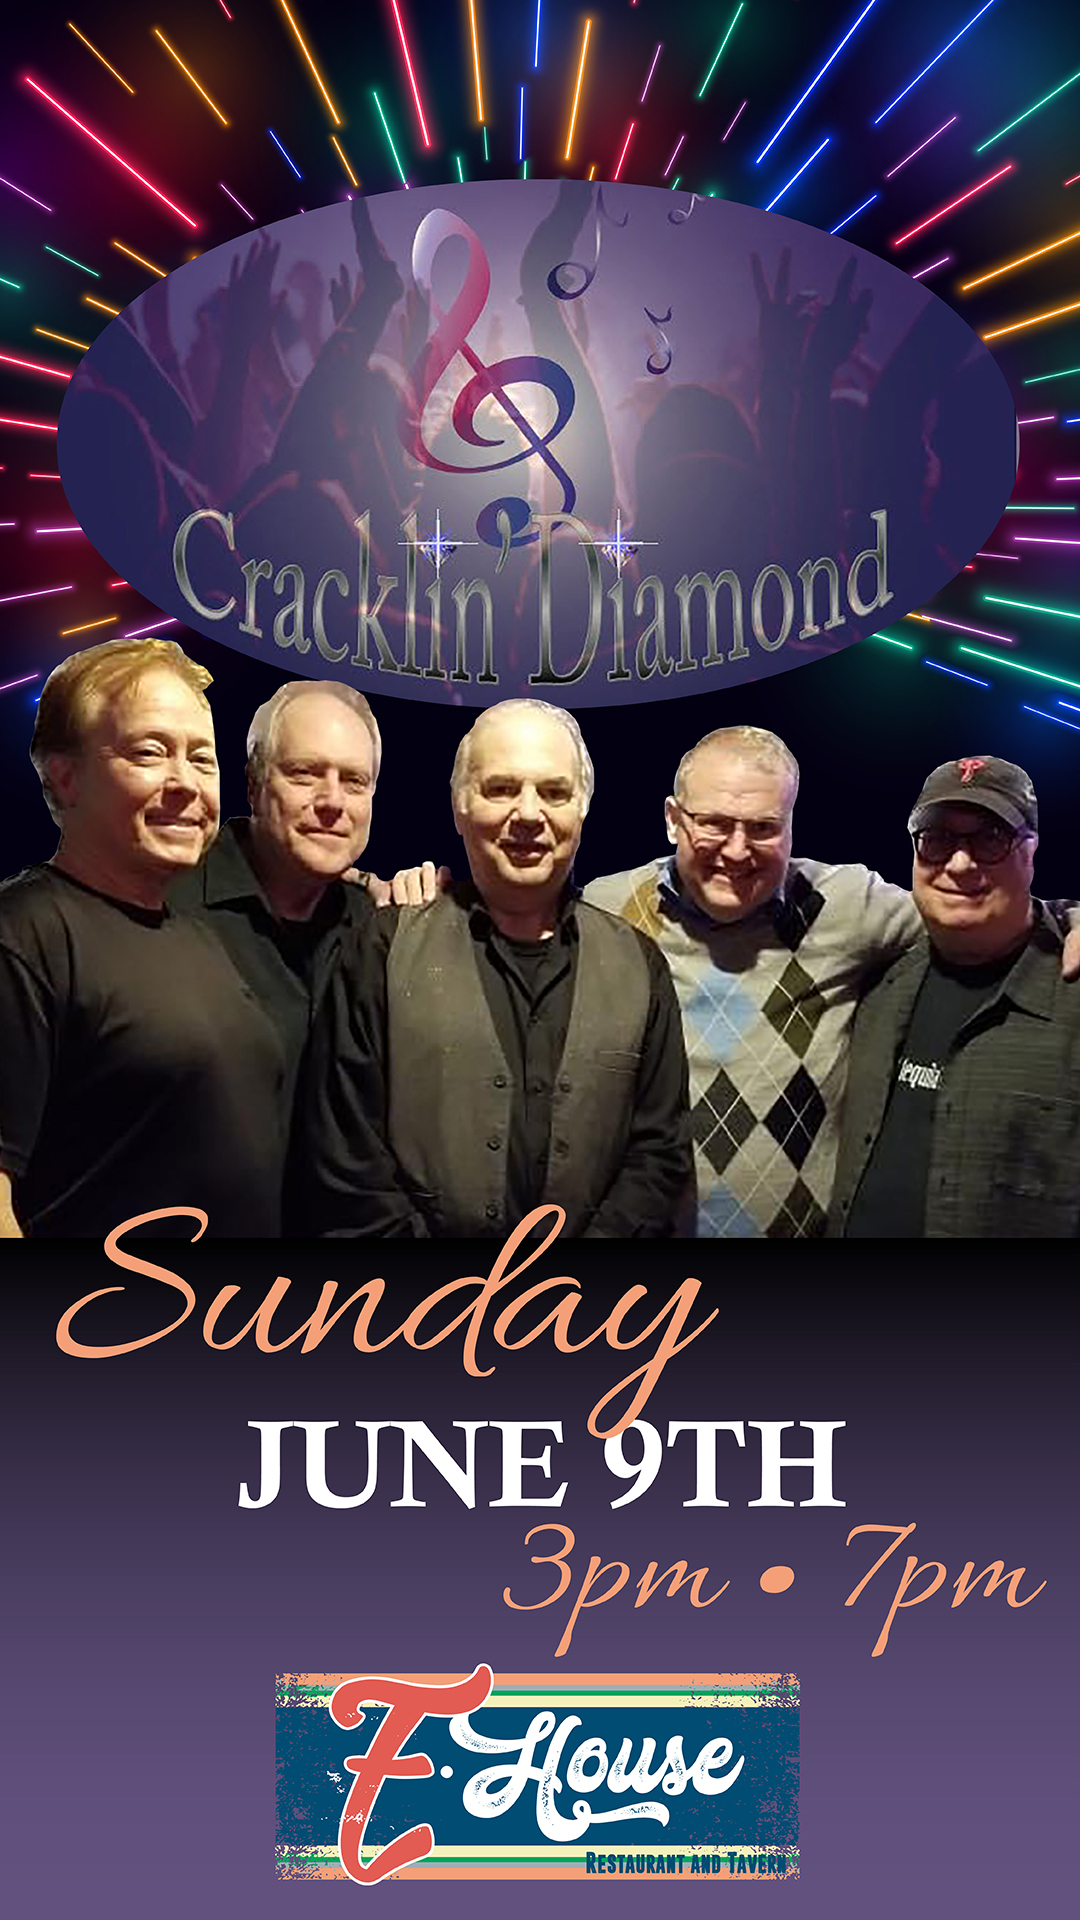 Poster for a live performance by the band Cracklin’ Diamond on Sunday, June 9th from 3 PM to 7 PM at T House Restaurant and Tavern, featuring a group photo of the band members.